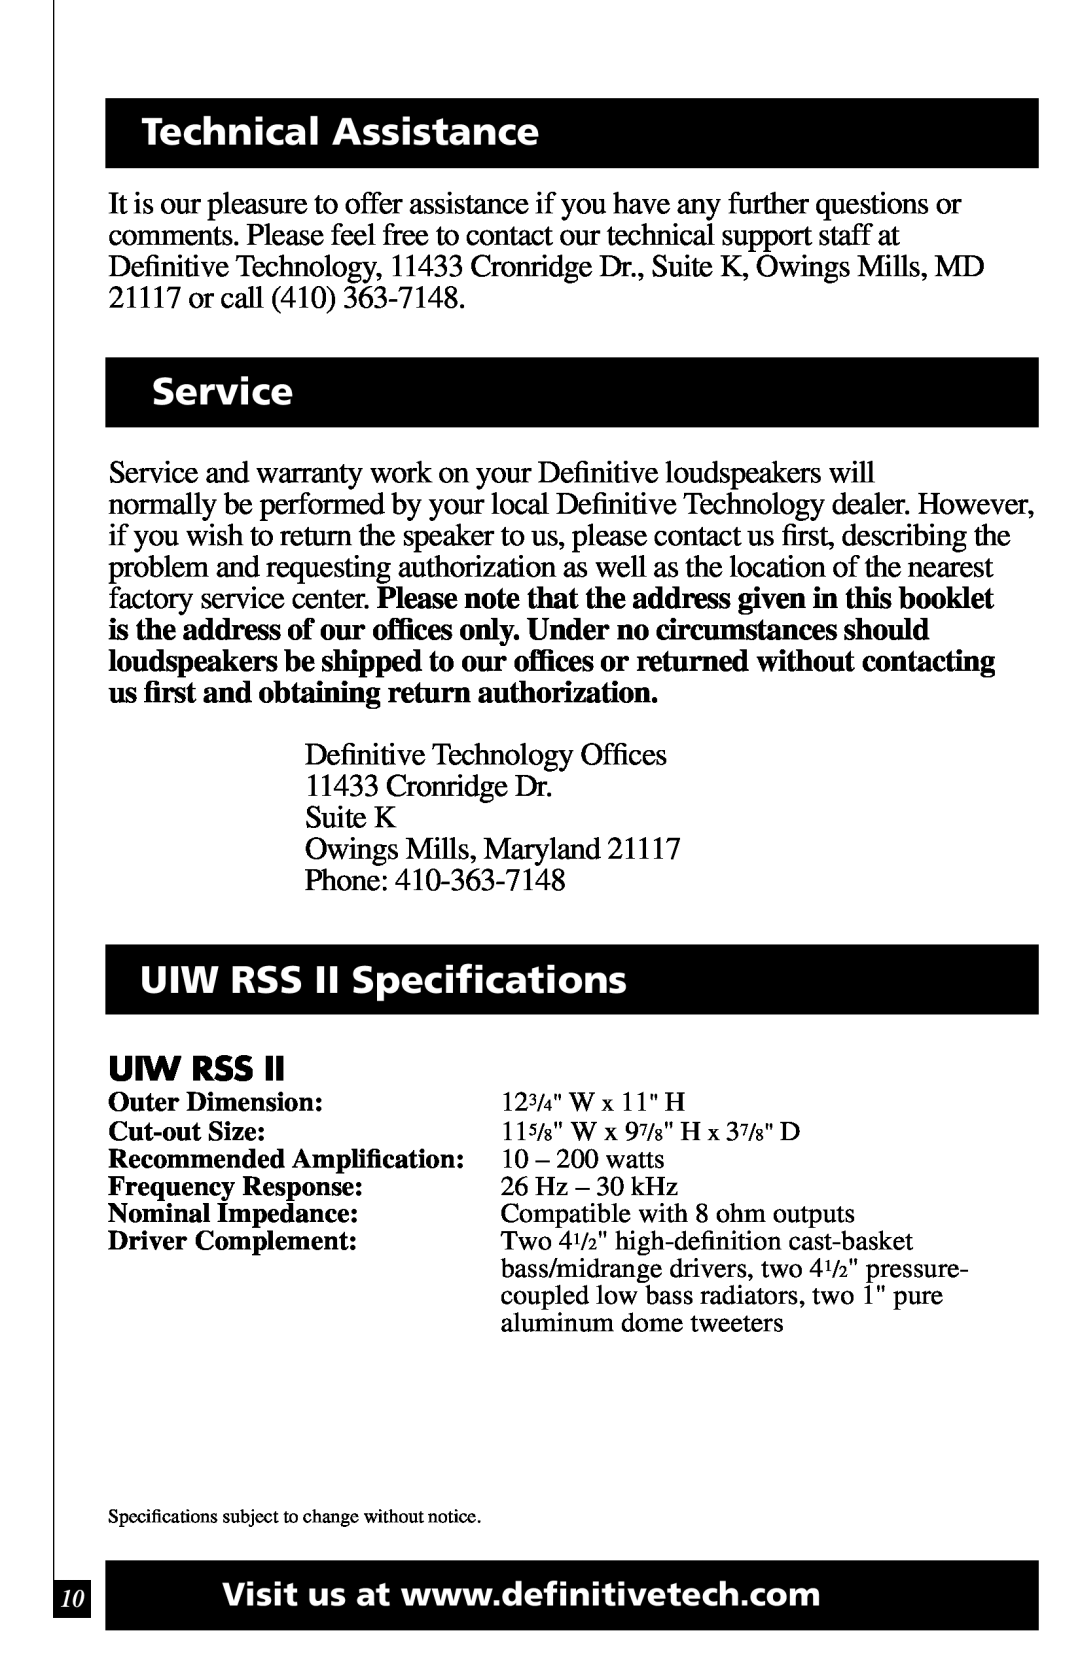 Definitive Technology owner manual Technical Assistance, Service, UIW RSS II Speciﬁcations, Uiw Rss 